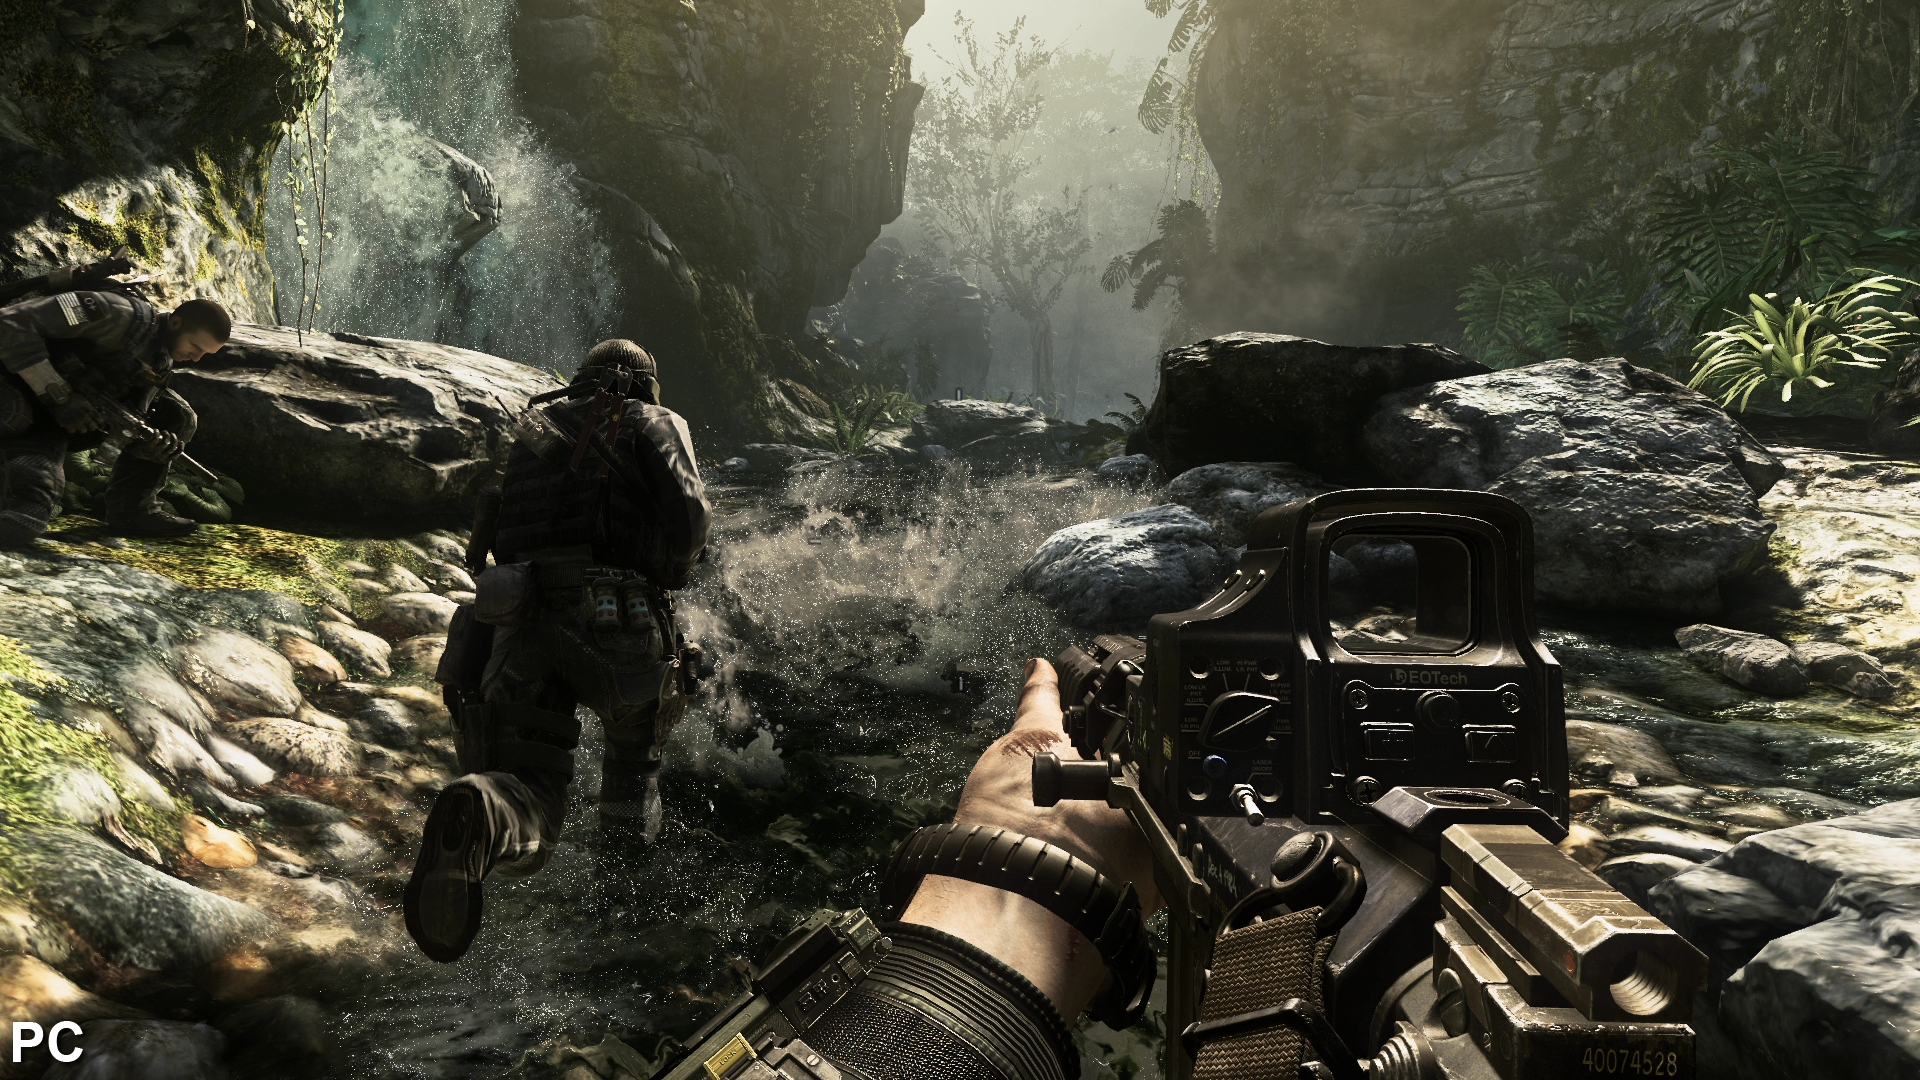 Call of Duty: Ghosts PC review